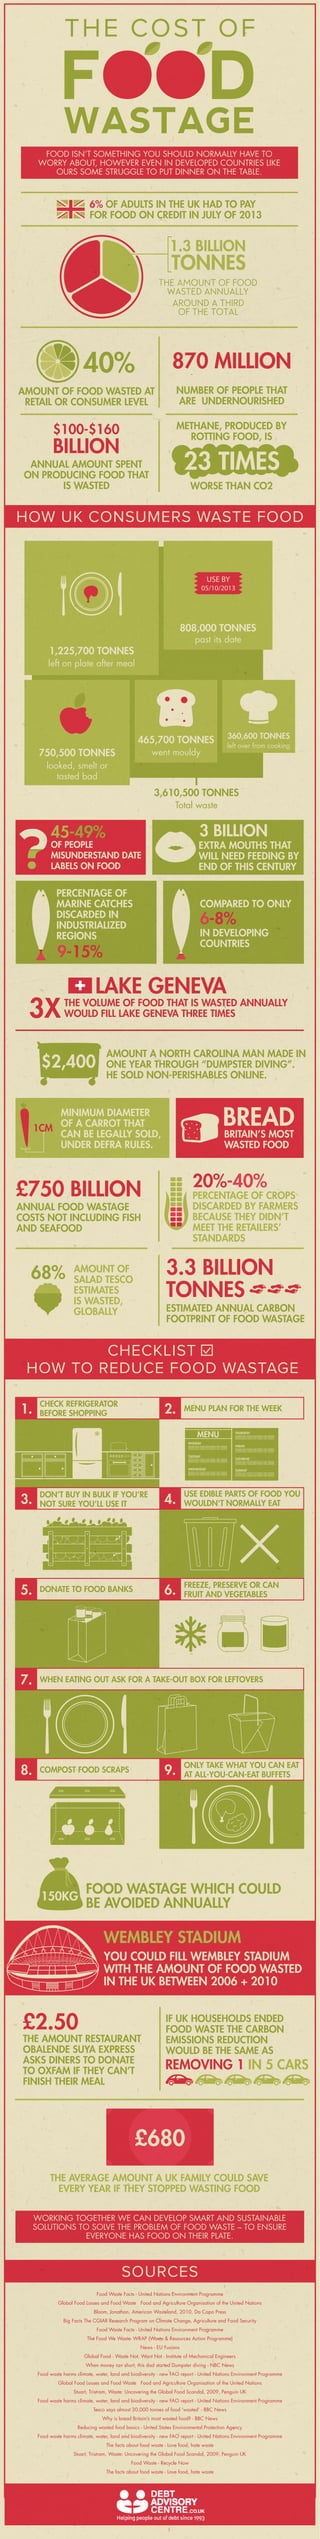 T HE COST OF

WASTAGE
FOOD ISN’T SOMETHING YOU SHOULD NORMALLY HAVE TO
WORRY ABOUT, HOWEVER EVEN IN DEVELOPED COUNTRIES LIKE
OURS SOME STRUGGLE TO PUT DINNER ON THE TABLE.

6% OF ADULTS IN THE UK HAD TO PAY
FOR FOOD ON CREDIT IN JULY OF 2013

THE AMOUNT OF FOOD
WASTED ANNUALLY
AROUND A THIRD
OF THE TOTAL

40%

870 MILLION
NUMBER OF PEOPLE THAT
ARE UNDERNOURISHED

AMOUNT OF FOOD WASTED AT
RETAIL OR CONSUMER LEVEL

METHANE, PRODUCED BY
ROTTING FOOD, IS

23 TIMES

ANNUAL AMOUNT SPENT
ON PRODUCING FOOD THAT
IS WASTED

WORSE THAN CO2

HOW UK CONSUMERS WASTE FOOD

USE BY

05/10/2013

808,000 TONNES
past its date

1,225,700 TONNES
left on plate after meal

360,600 TONNES

465,700 TONNES

left over from cooking

went mouldy

750,500 TONNES
looked, smelt or
tasted bad

3,610,500 TONNES
Total waste

3 BILLION

45-49%

OF PEOPLE
MISUNDERSTAND DATE
LABELS ON FOOD

EXTRA MOUTHS THAT
WILL NEED FEEDING BY
END OF THIS CENTURY

PERCENTAGE OF
MARINE CATCHES
DISCARDED IN
INDUSTRIALIZED
REGIONS

COMPARED TO ONLY

6-8%

IN DEVELOPING
COUNTRIES

9-15%

LAKE GENEVA

THE VOLUME OF FOOD THAT IS WASTED ANNUALLY
WOULD FILL LAKE GENEVA THREE TIMES

AMOUNT A NORTH CAROLINA MAN MADE IN
ONE YEAR THROUGH “DUMPSTER DIVING”.
HE SOLD NON-PERISHABLES ONLINE.

MINIMUM DIAMETER
1CM OF A CARROT THAT
CAN BE LEGALLY SOLD,
UNDER DEFRA RULES.

BRITAIN’S MOST
WASTED FOOD

20%-40%

£750 BILLION

PERCENTAGE OF CROPS
DISCARDED BY FARMERS
BECAUSE THEY DIDN’T
MEET THE RETAILERS’
STANDARDS

ANNUAL FOOD WASTAGE
COSTS NOT INCLUDING FISH
AND SEAFOOD

68%

3.3 BILLION
TONNES

AMOUNT OF
SALAD TESCO
ESTIMATES
IS WASTED,
GLOBALLY

ESTIMATED ANNUAL CARBON
FOOTPRINT OF FOOD WASTAGE

CHECKLIST
HOW TO REDUCE FOOD WASTAGE
1.

CHECK REFRIGERATOR
BEFORE SHOPPING

2.

MENU PLAN FOR THE WEEK
MENU
MONDAY

TUESDAY

WEDNESDAY

THURSDAY

FRIDAY

SATURDAY
SUNDAY

4.

USE EDIBLE PARTS OF FOOD YOU
WOULDN'T NORMALLY EAT

6.

FREEZE, PRESERVE OR CAN
FRUIT AND VEGETABLES

3.

DON’T BUY IN BULK IF YOU’RE
NOT SURE YOU’LL USE IT

5.

DONATE TO FOOD BANKS

7.

WHEN EATING OUT ASK FOR A TAKE-OUT BOX FOR LEFTOVERS

8.

COMPOST FOOD SCRAPS

9.

ONLY TAKE WHAT YOU CAN EAT
AT ALL-YOU-CAN-EAT BUFFETS

FOOD WASTAGE WHICH COULD
150KG
BE AVOIDED ANNUALLY

WEMBLEY STADIUM
YOU COULD FILL WEMBLEY STADIUM
WITH THE AMOUNT OF FOOD WASTED
IN THE UK BETWEEN 2006 + 2010

£2.50

THE AMOUNT RESTAURANT
OBALENDE SUYA EXPRESS
ASKS DINERS TO DONATE
TO OXFAM IF THEY CAN’T
FINISH THEIR MEAL

IF UK HOUSEHOLDS ENDED
FOOD WASTE THE CARBON
EMISSIONS REDUCTION
WOULD BE THE SAME AS

REMOVING 1 IN 5 CARS

THE AVERAGE AMOUNT A UK FAMILY COULD SAVE
EVERY YEAR IF THEY STOPPED WASTING FOOD
WORKING TOGETHER WE CAN DEVELOP SMART AND SUSTAINABLE
SOLUTIONS TO SOLVE THE PROBLEM OF FOOD WASTE – TO ENSURE
EVERYONE HAS FOOD ON THEIR PLATE.

SOURCES
Food Waste Facts - United Nations Environment Programme
Global Food Losses and Food Waste Food and Agriculture Organisation of the United Nations
Bloom, Jonathan, American Wasteland, 2010, Da Capo Press
Big Facts The CGIAR Research Program on Climate Change, Agriculture and Food Security
Food Waste Facts - United Nations Environment Programme
The Food We Waste- WRAP (Waste & Resources Action Programme)
News - EU Fusions
Global Food - Waste Not, Want Not - Institute of Mechanical Engineers
When money ran short, this dad started Dumpster diving - NBC News
Food waste harms climate, water, land and biodiversity - new FAO report - United Nations Environment Programme
Global Food Losses and Food Waste Food and Agriculture Organisation of the United Nations
Stuart, Tristram, Waste: Uncovering the Global Food Scandal, 2009, Penguin UK
Food waste harms climate, water, land and biodiversity - new FAO report - United Nations Environment Programme
Tesco says almost 30,000 tonnes of food ‘wasted’ - BBC News
Why is bread Britain’s most wasted food? - BBC News
Reducing wasted food basics - United States Environmental Protection Agency
Food waste harms climate, water, land and biodiversity - new FAO report - United Nations Environment Programme
The facts about food waste - Love food, hate waste
Stuart, Tristram, Waste: Uncovering the Global Food Scandal, 2009, Penguin UK
Food Waste - Recycle Now
The facts about food waste - Love food, hate waste

Debt Advisory Centre is a trading style of Freeman Jones Limited.

 